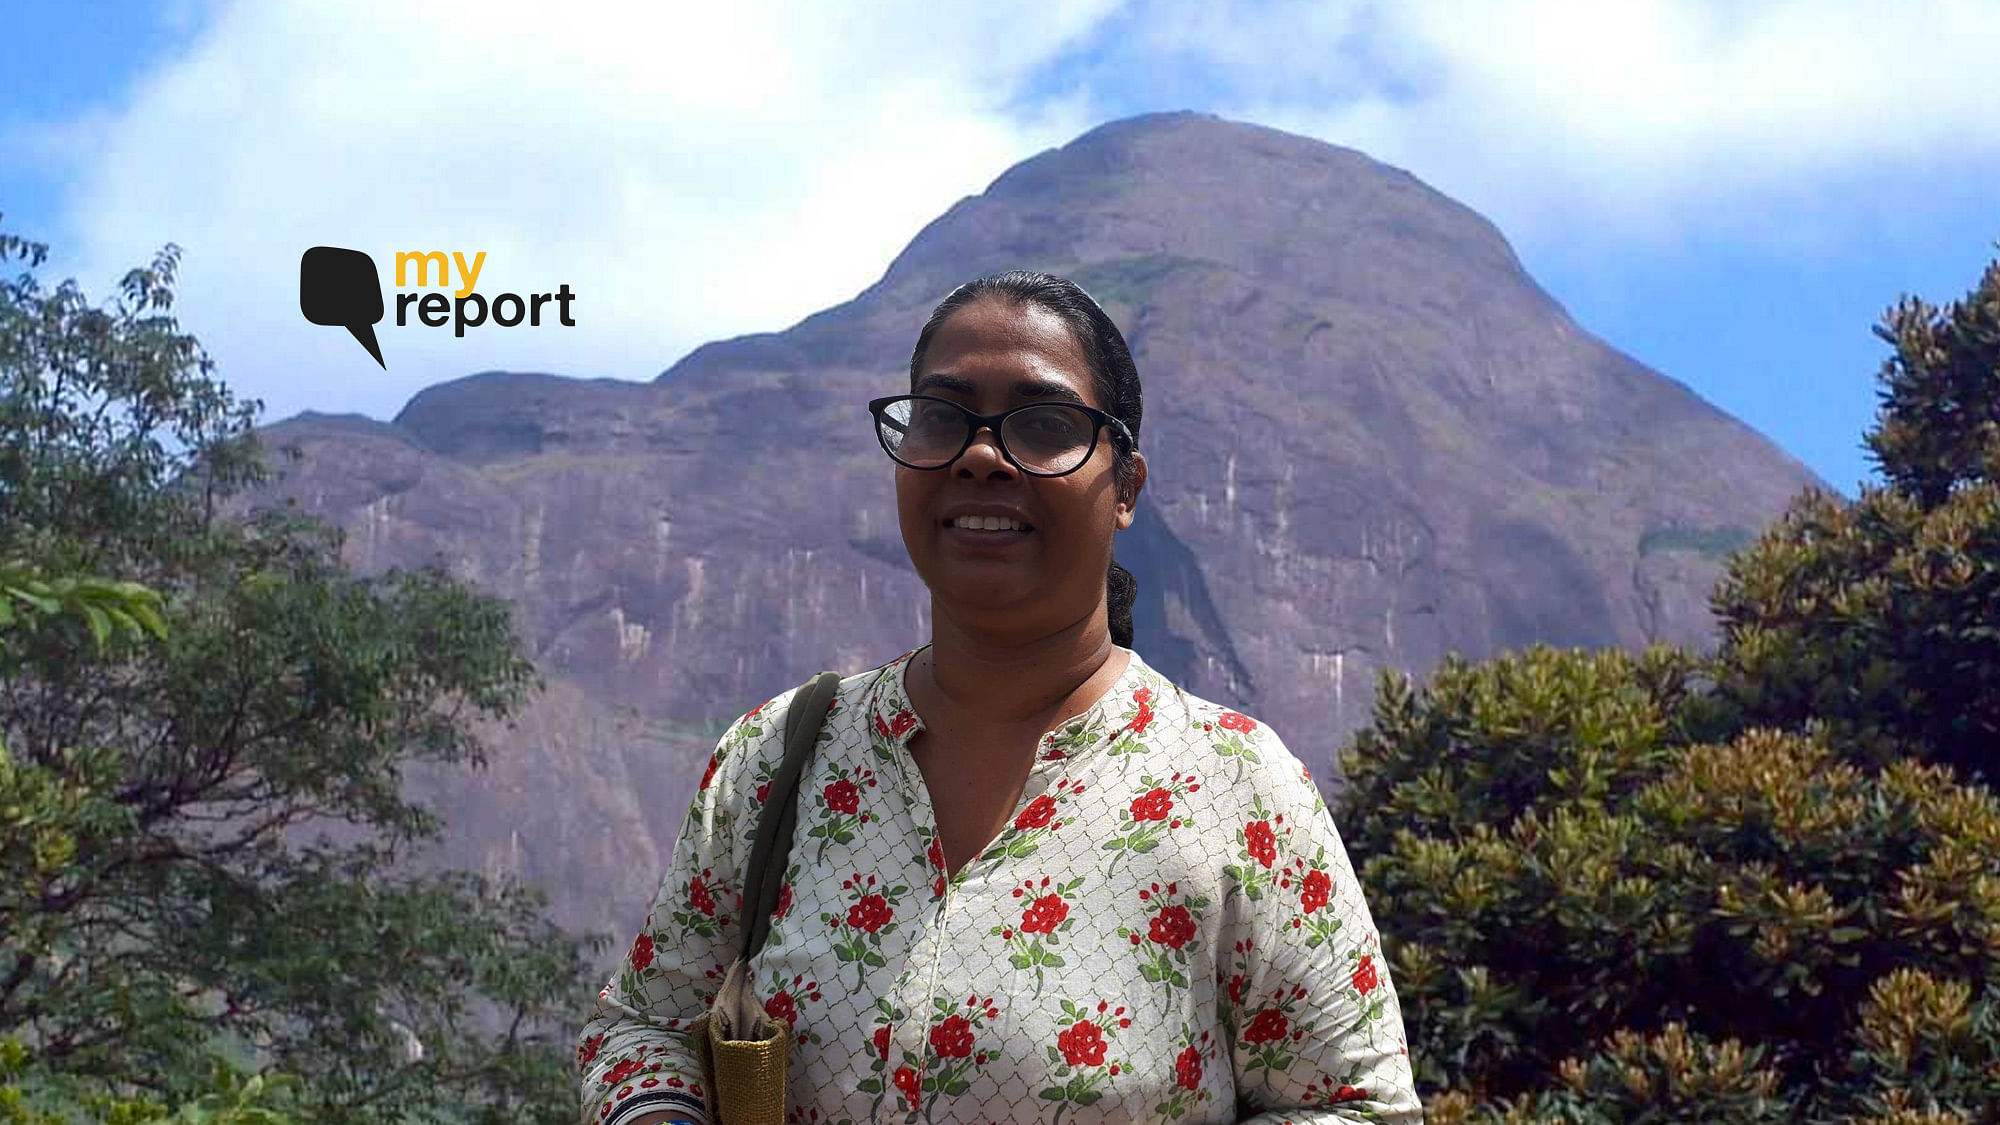 Mini Mohan and Femina are among the first 10 women who will begin their trek on 14 January 2019 to Agastya Mala in Kerala.